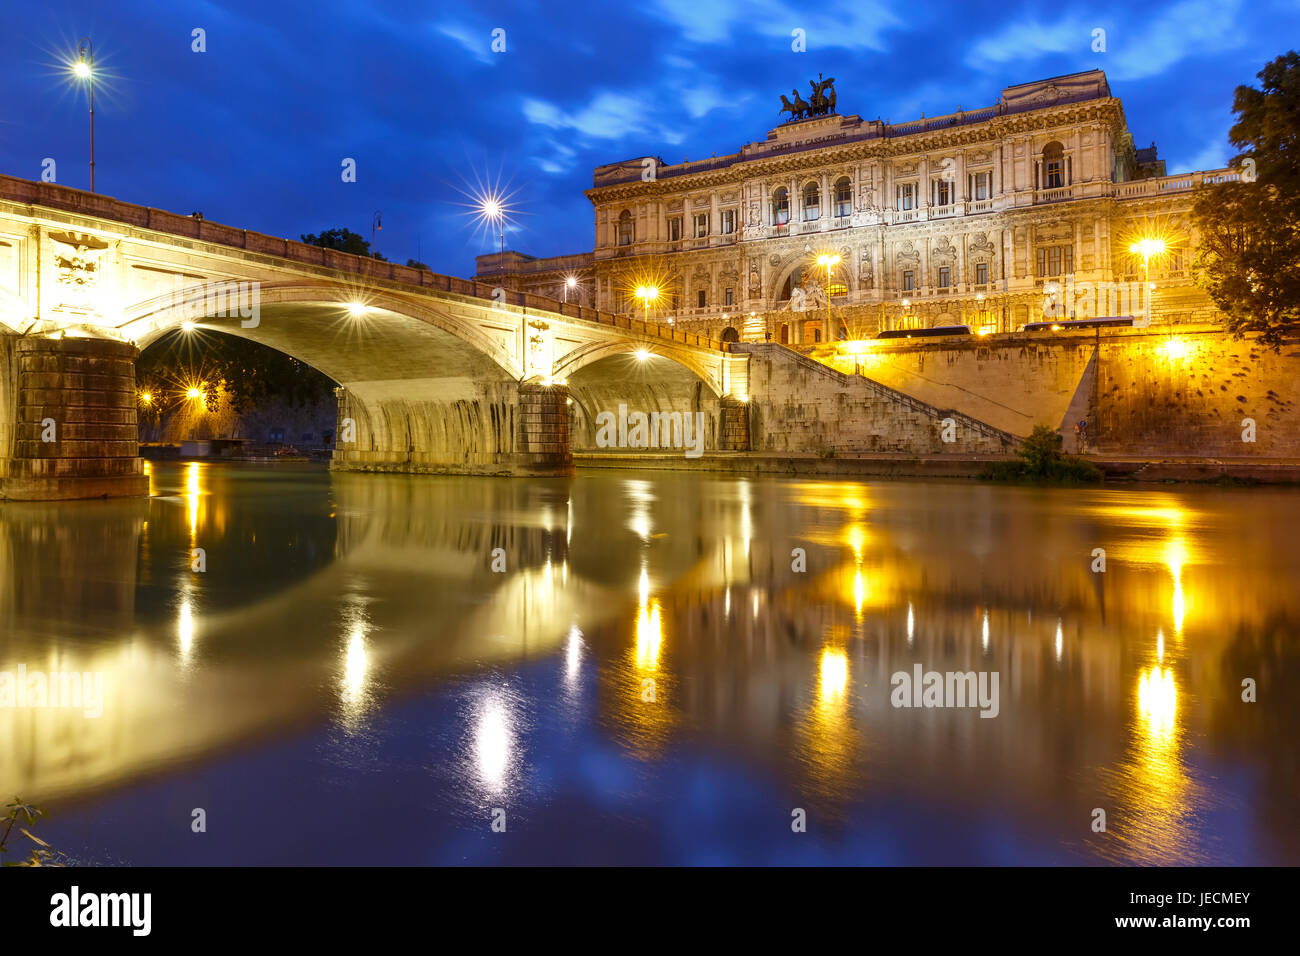 The Palace of Justice in Rome, Italy Stock Photo